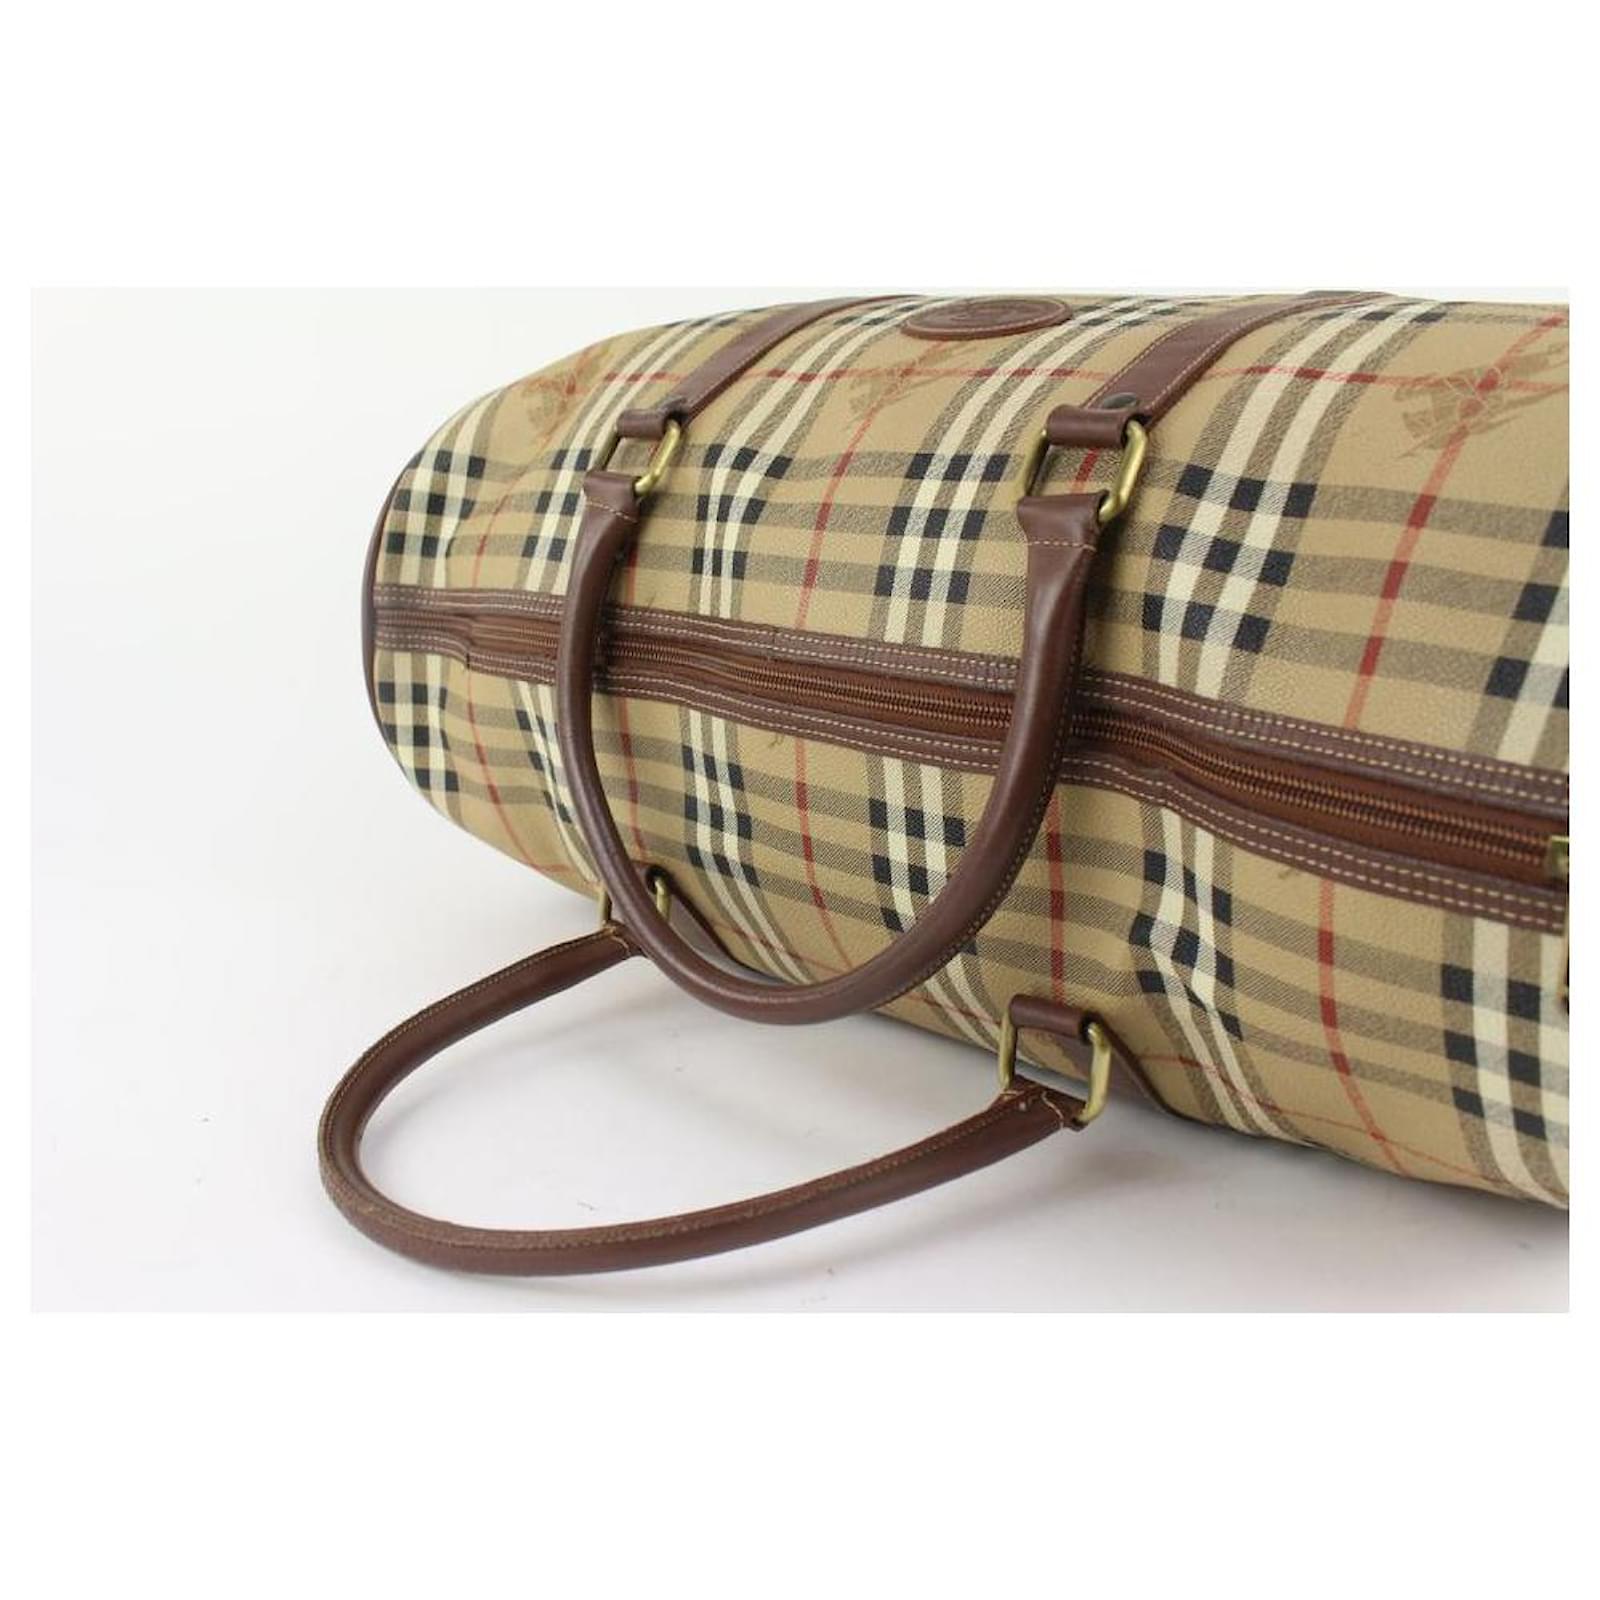 Burberry Beige Nova Check Duffle Bag with Strap Boston Upcycle ready 6 –  Bagriculture